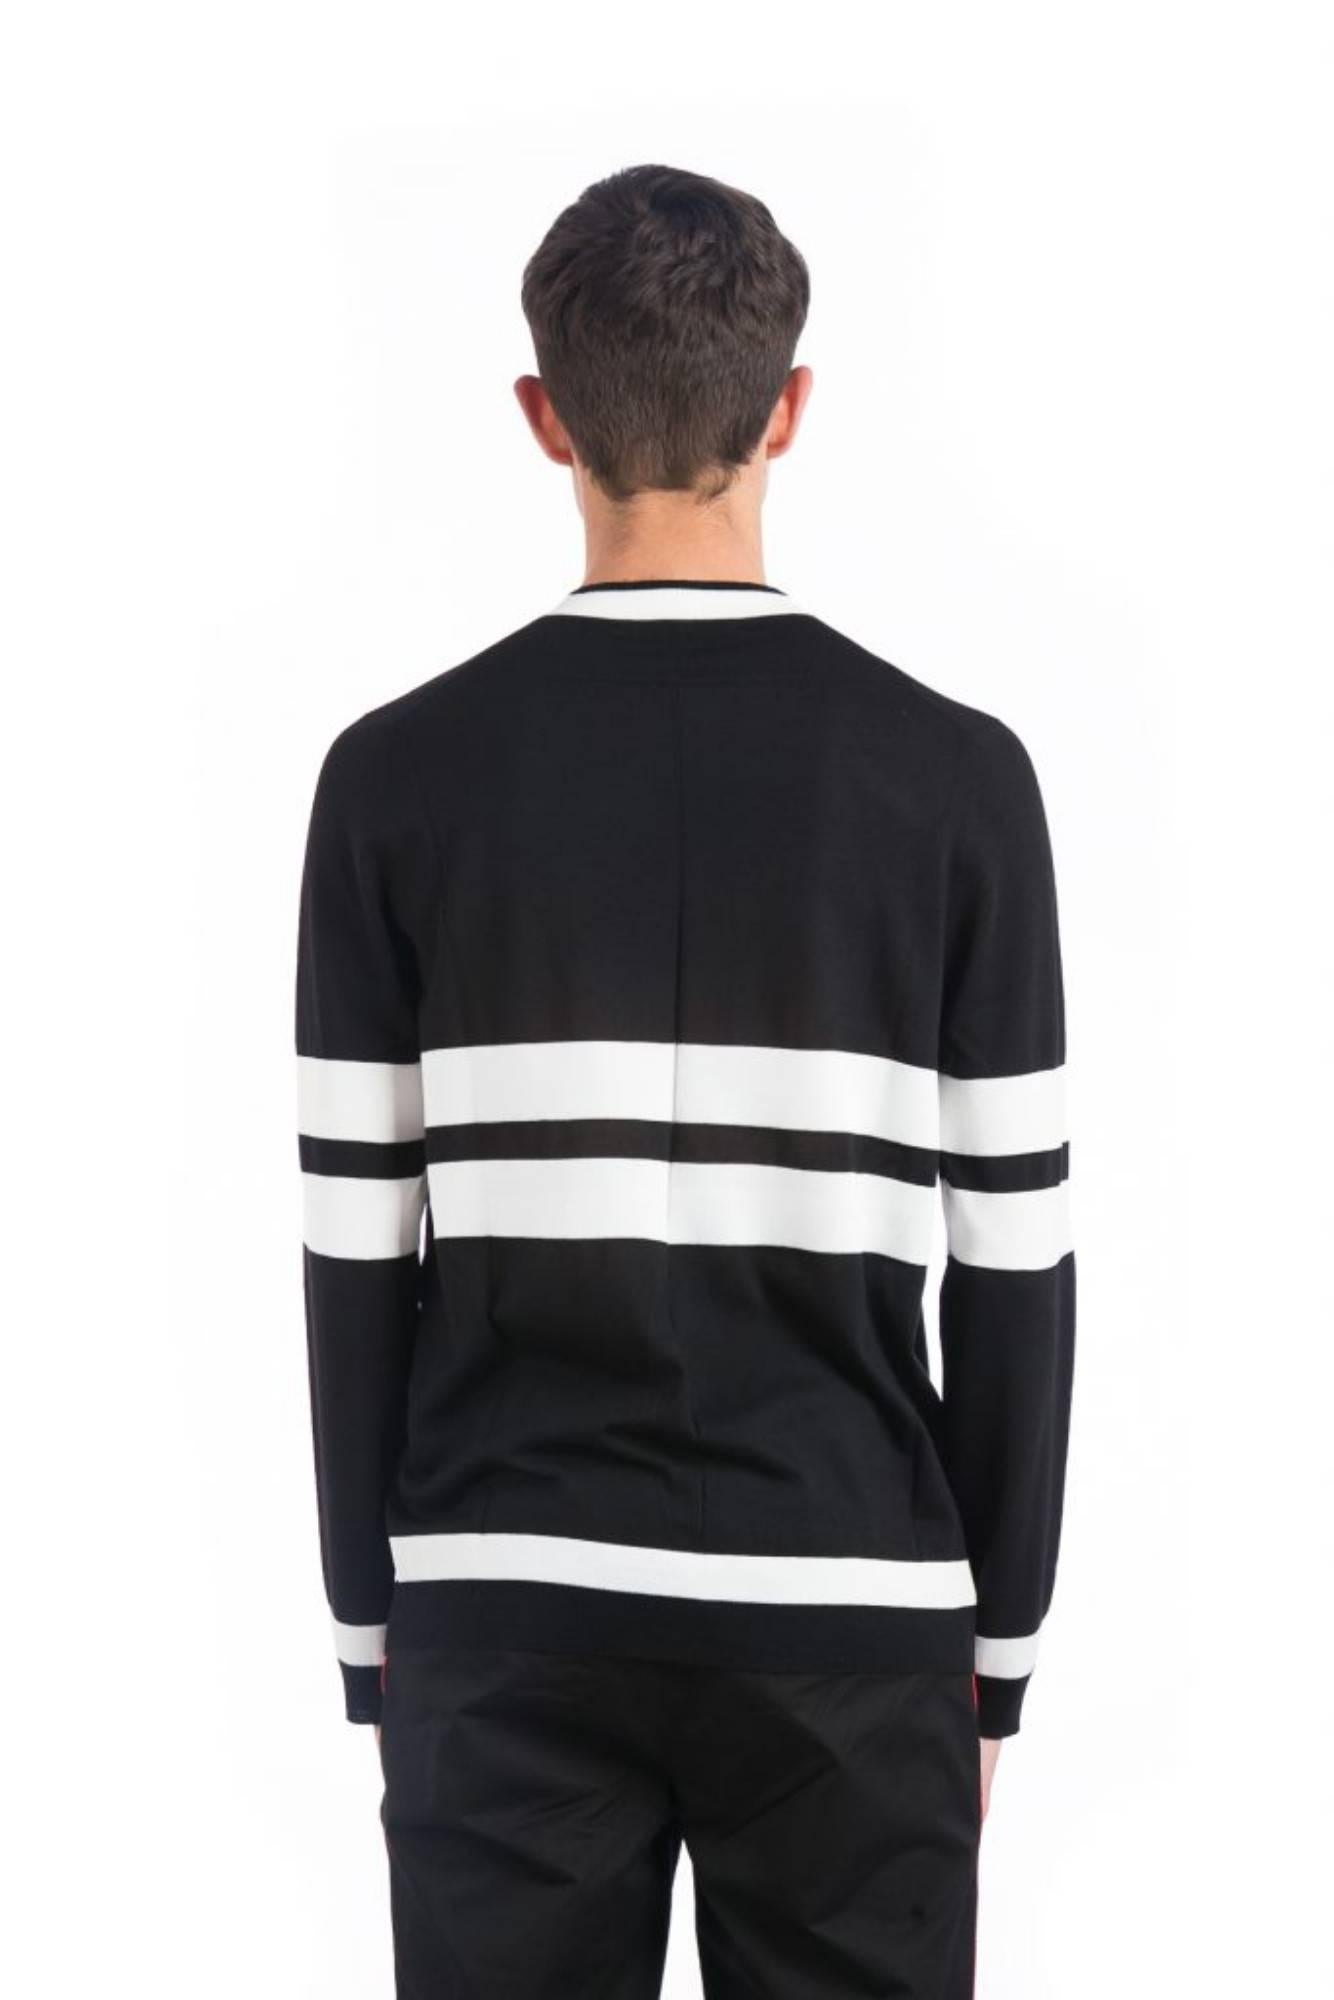 Black Givenchy Striped Sweater (Size - M) For Sale